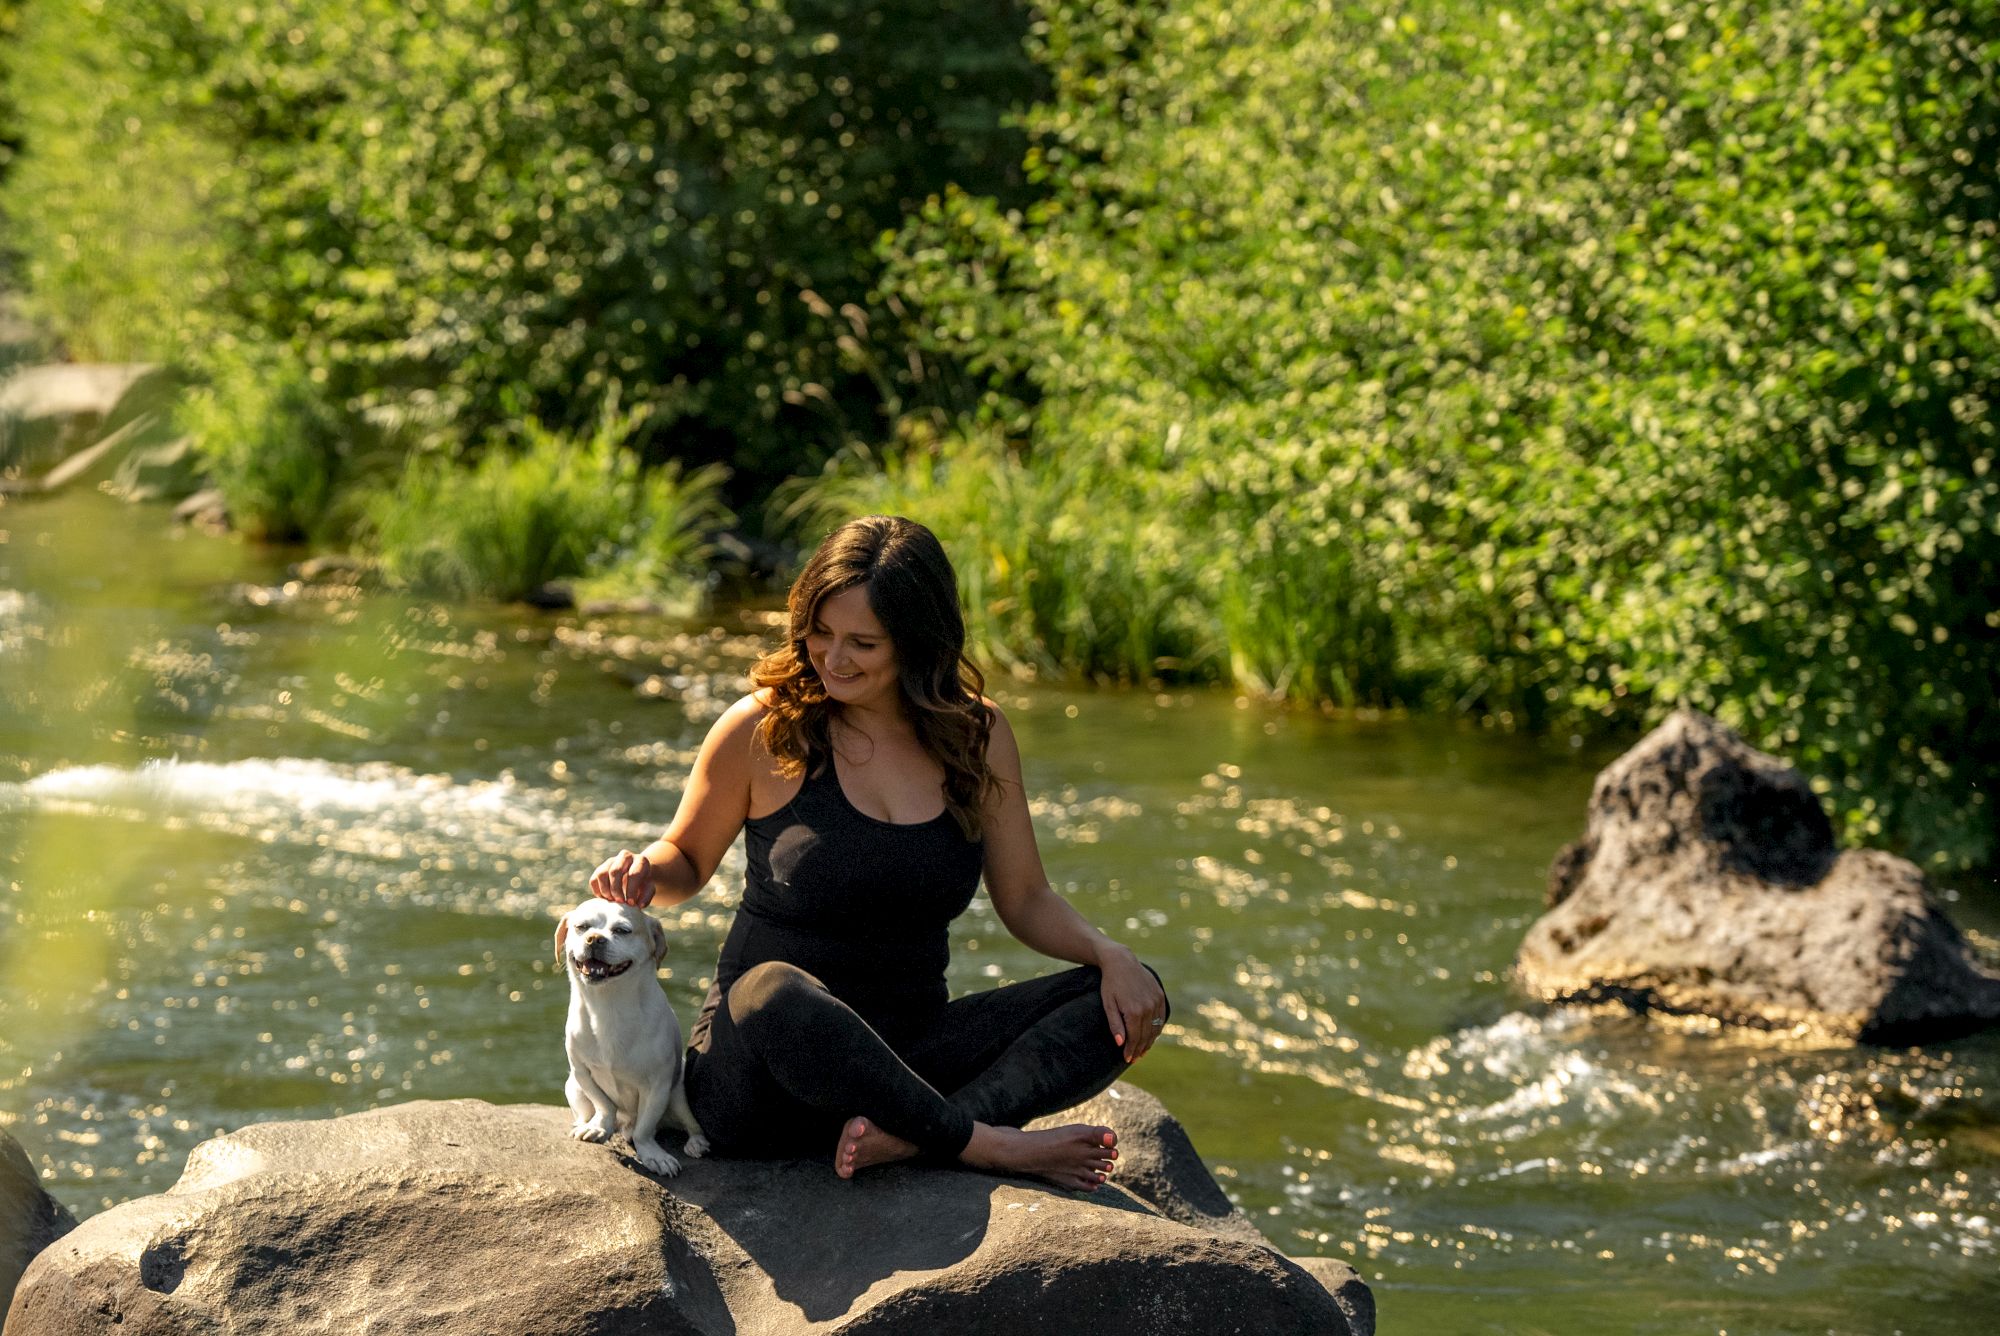 A woman sits on a rock by a river, petting a dog, surrounded by lush greenery and flowing water.